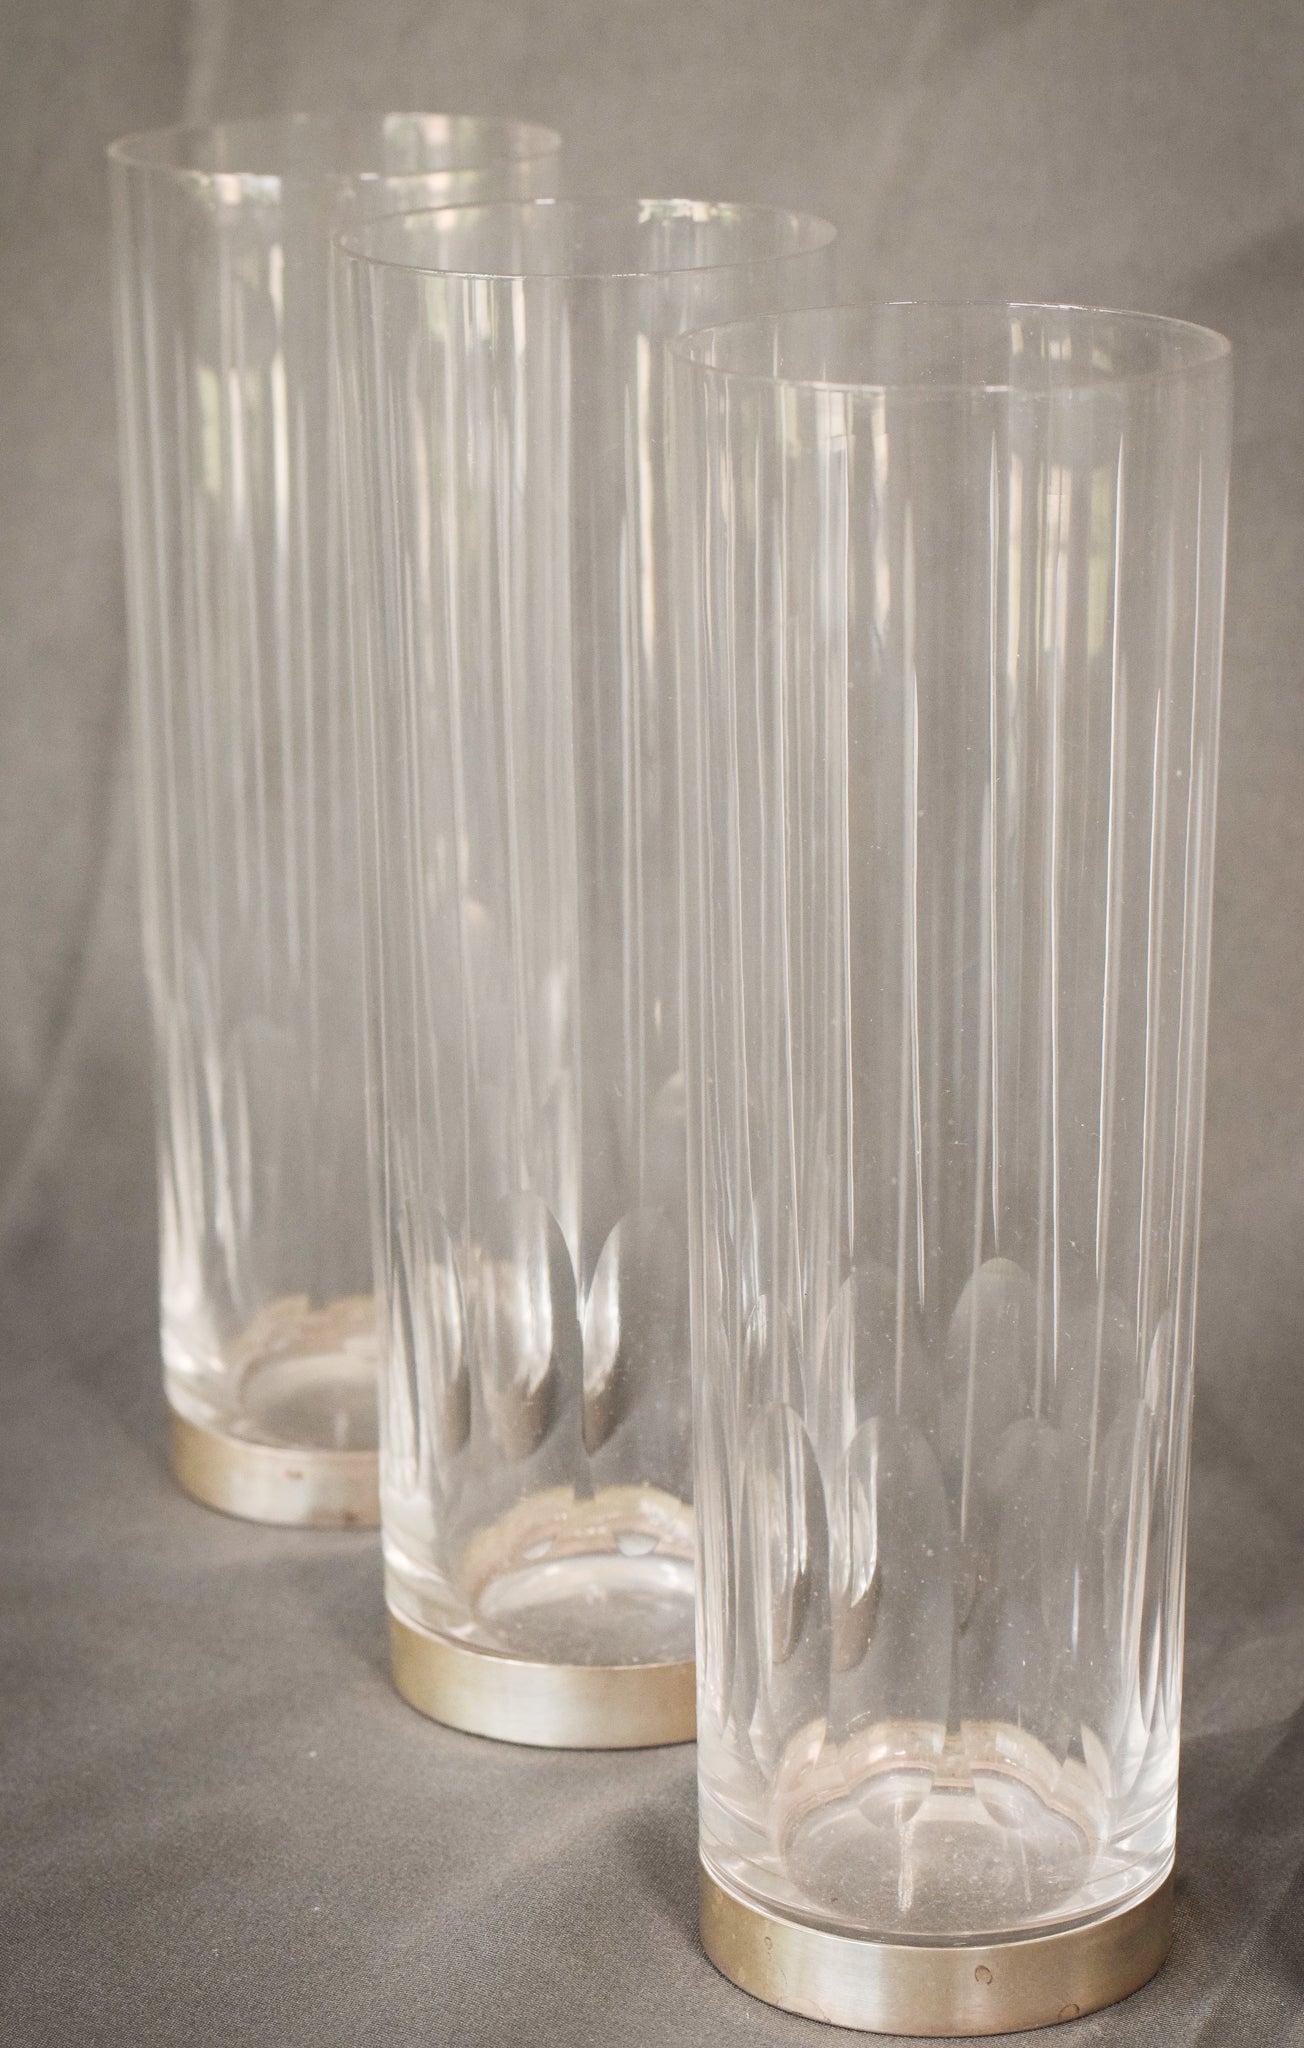 Set of 6 Glasses with Silver Bases